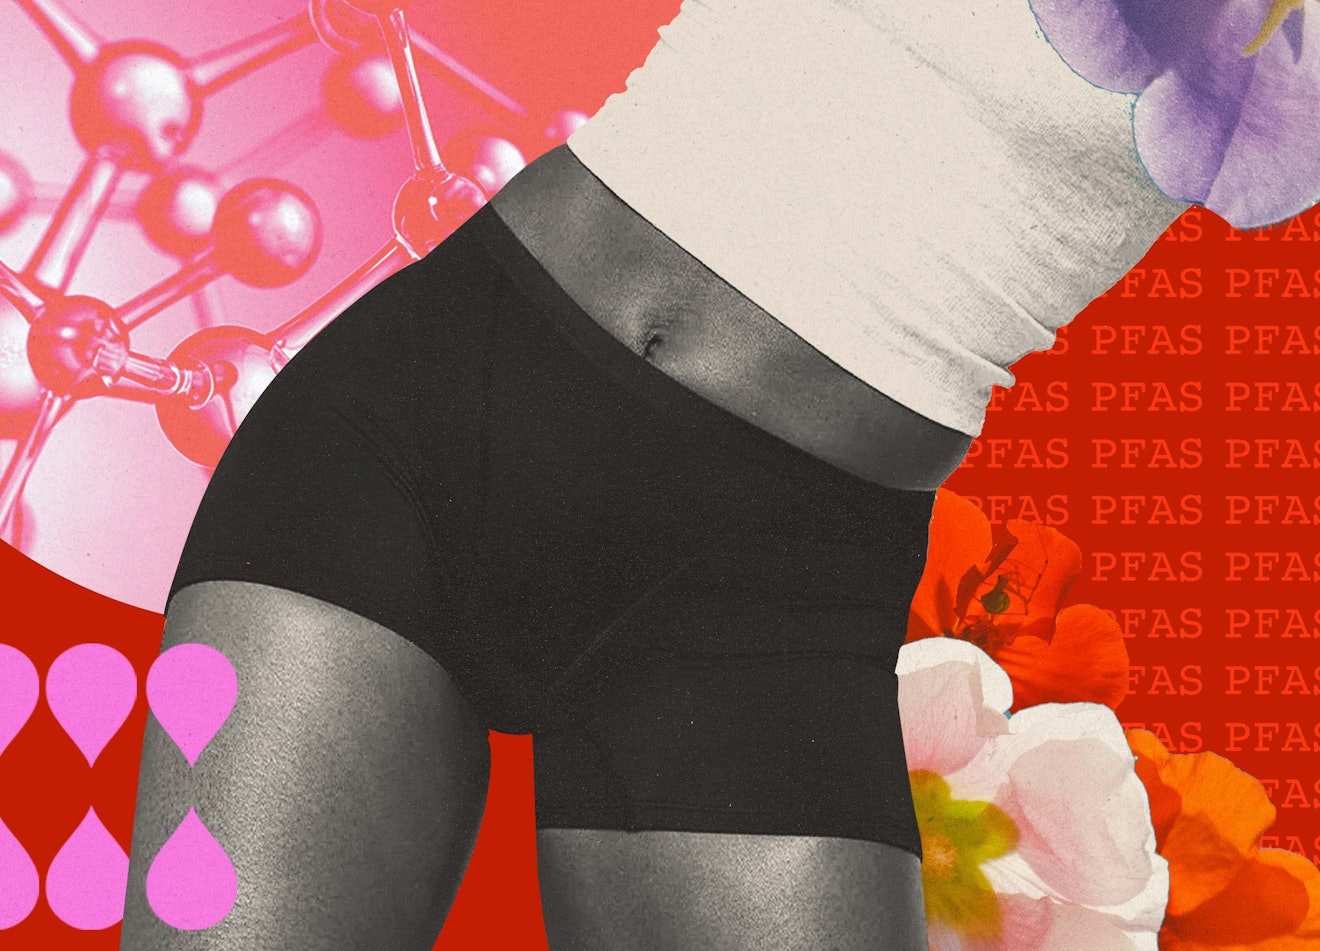 The Thinx Lawsuit About Its Period Underwear Isn't Fazing All Users